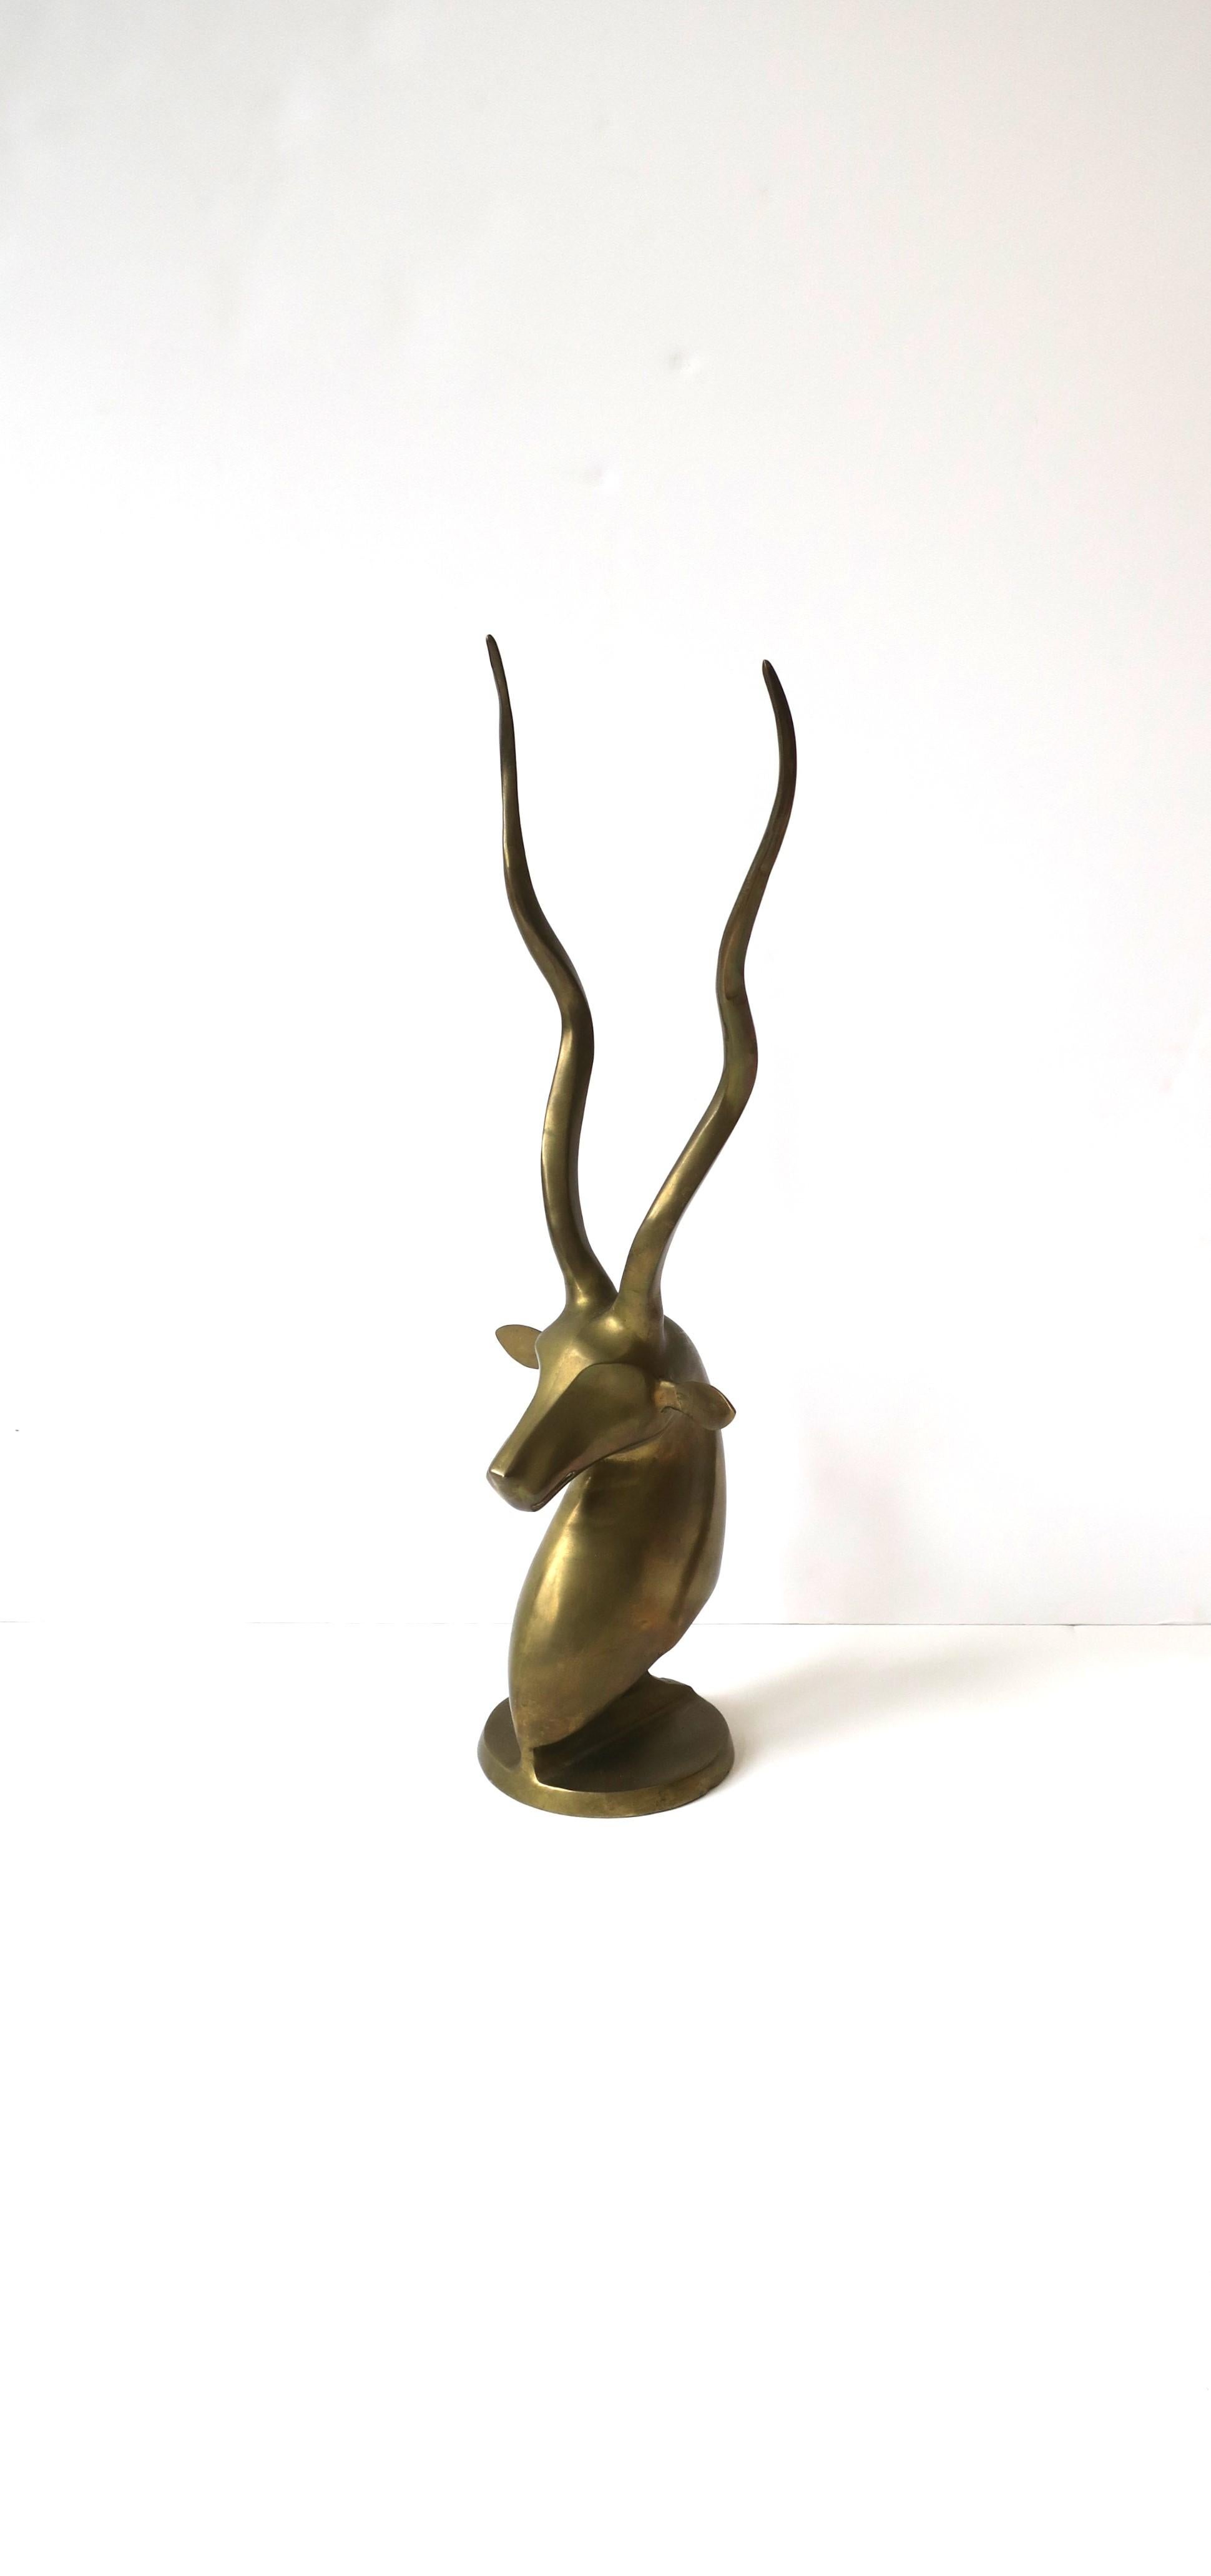 Brass Gazelle Antelope Sculpture Decorative Object, Tall In Good Condition For Sale In New York, NY